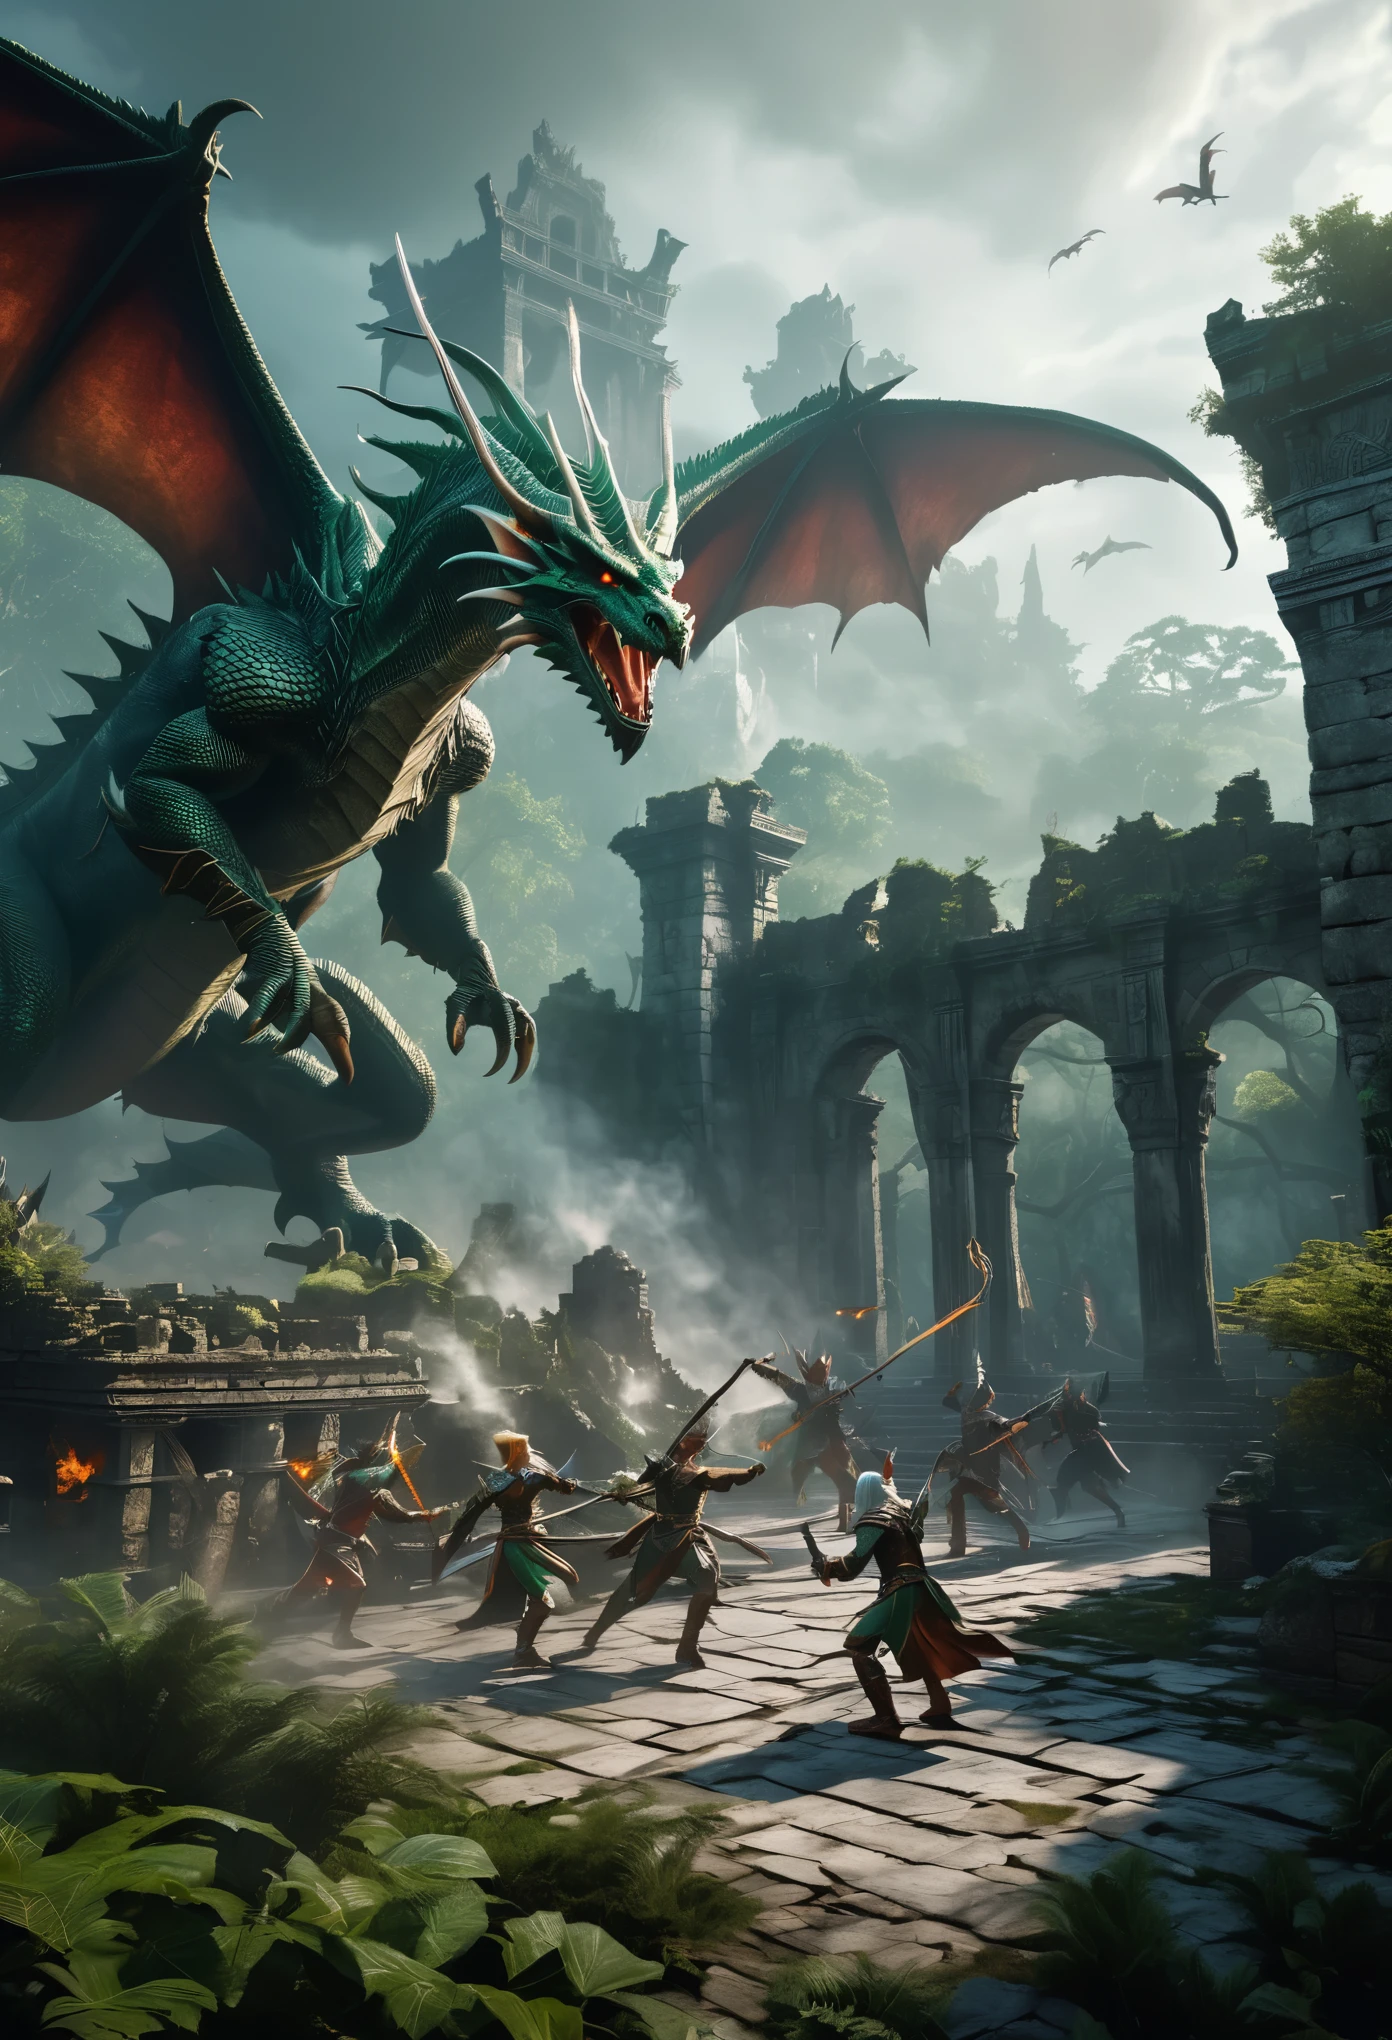 Epic battle scene from Dungeons & Dragons. Elves fighting against evil dragon. Ancient ruins in the background, surrounded by a misty forest. Magic spells flying through the air,  clashing. Dynamic lighting, detailed textures, and realistic shadows